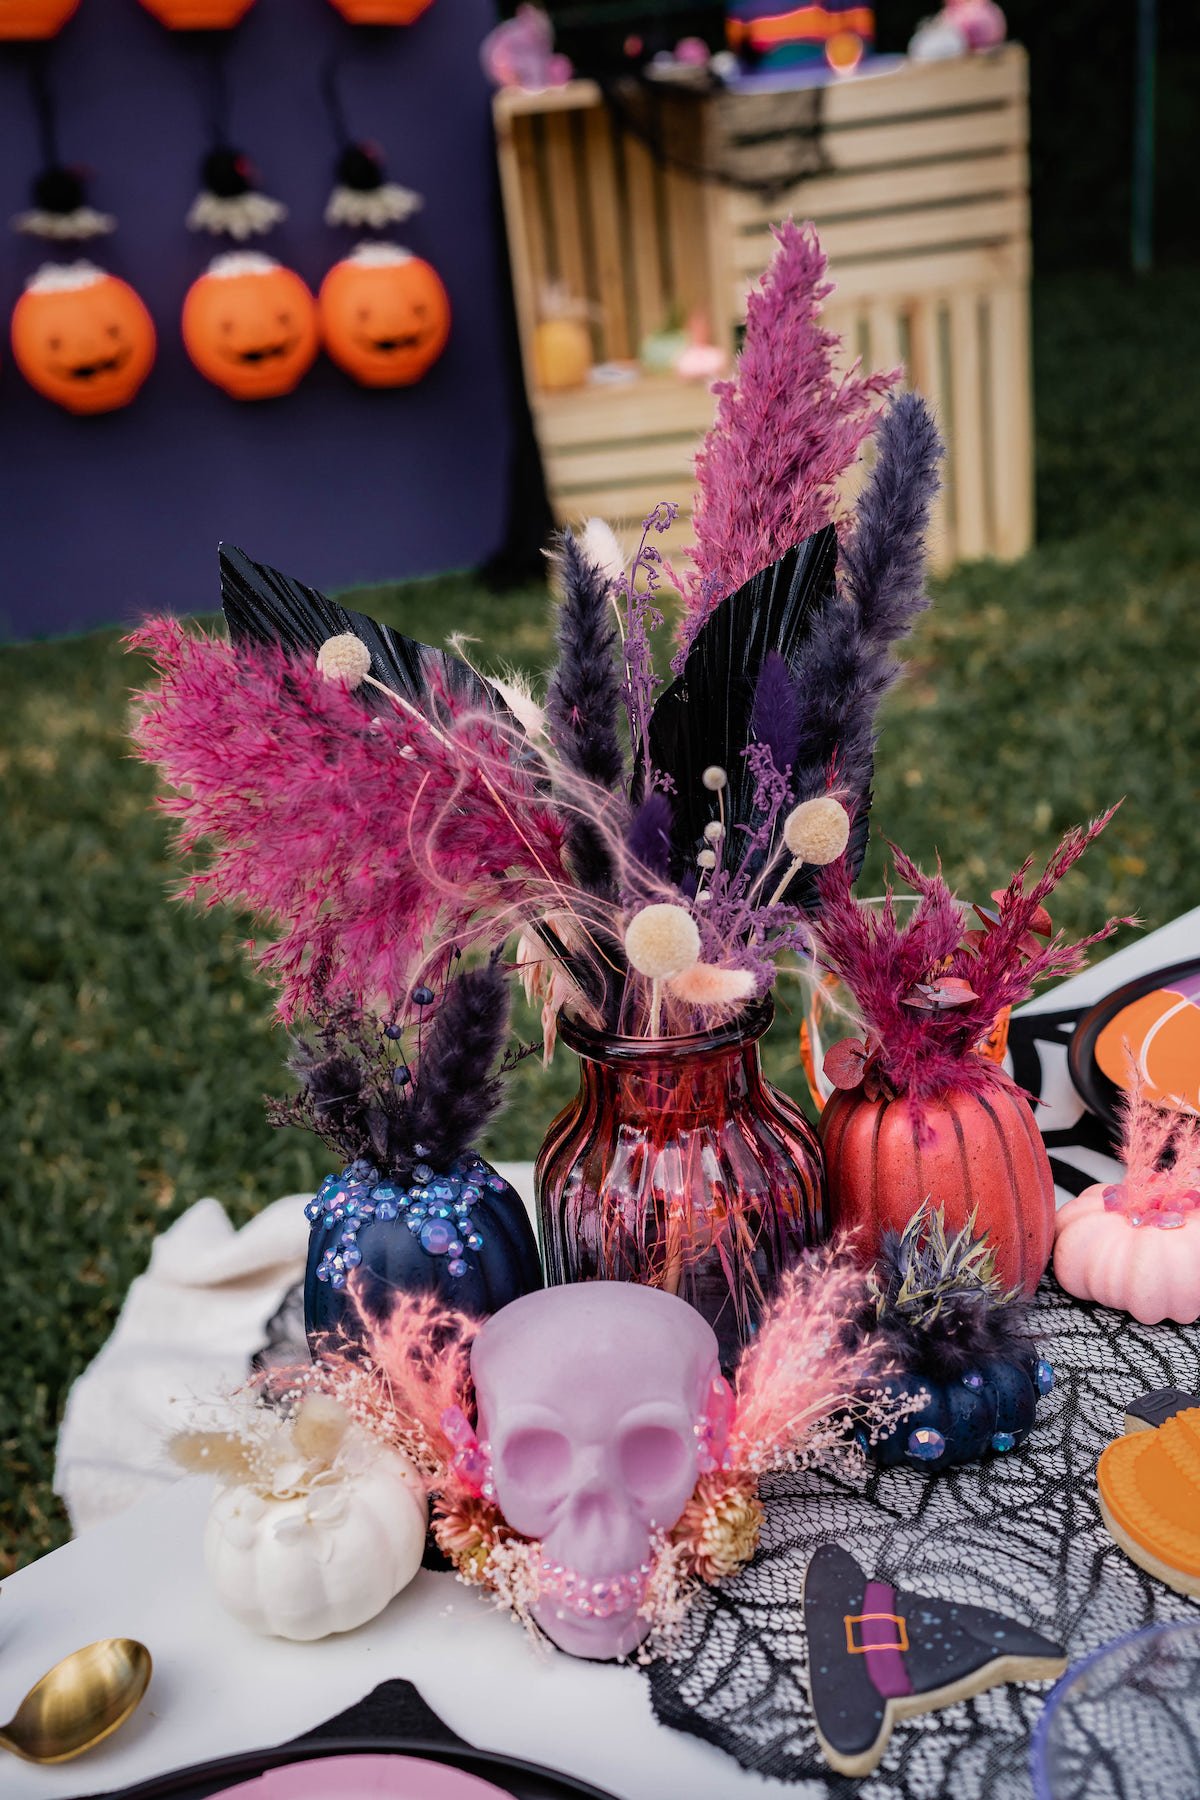 Colorful bedazzled pumpkins, skull heads and dried flower arrangements